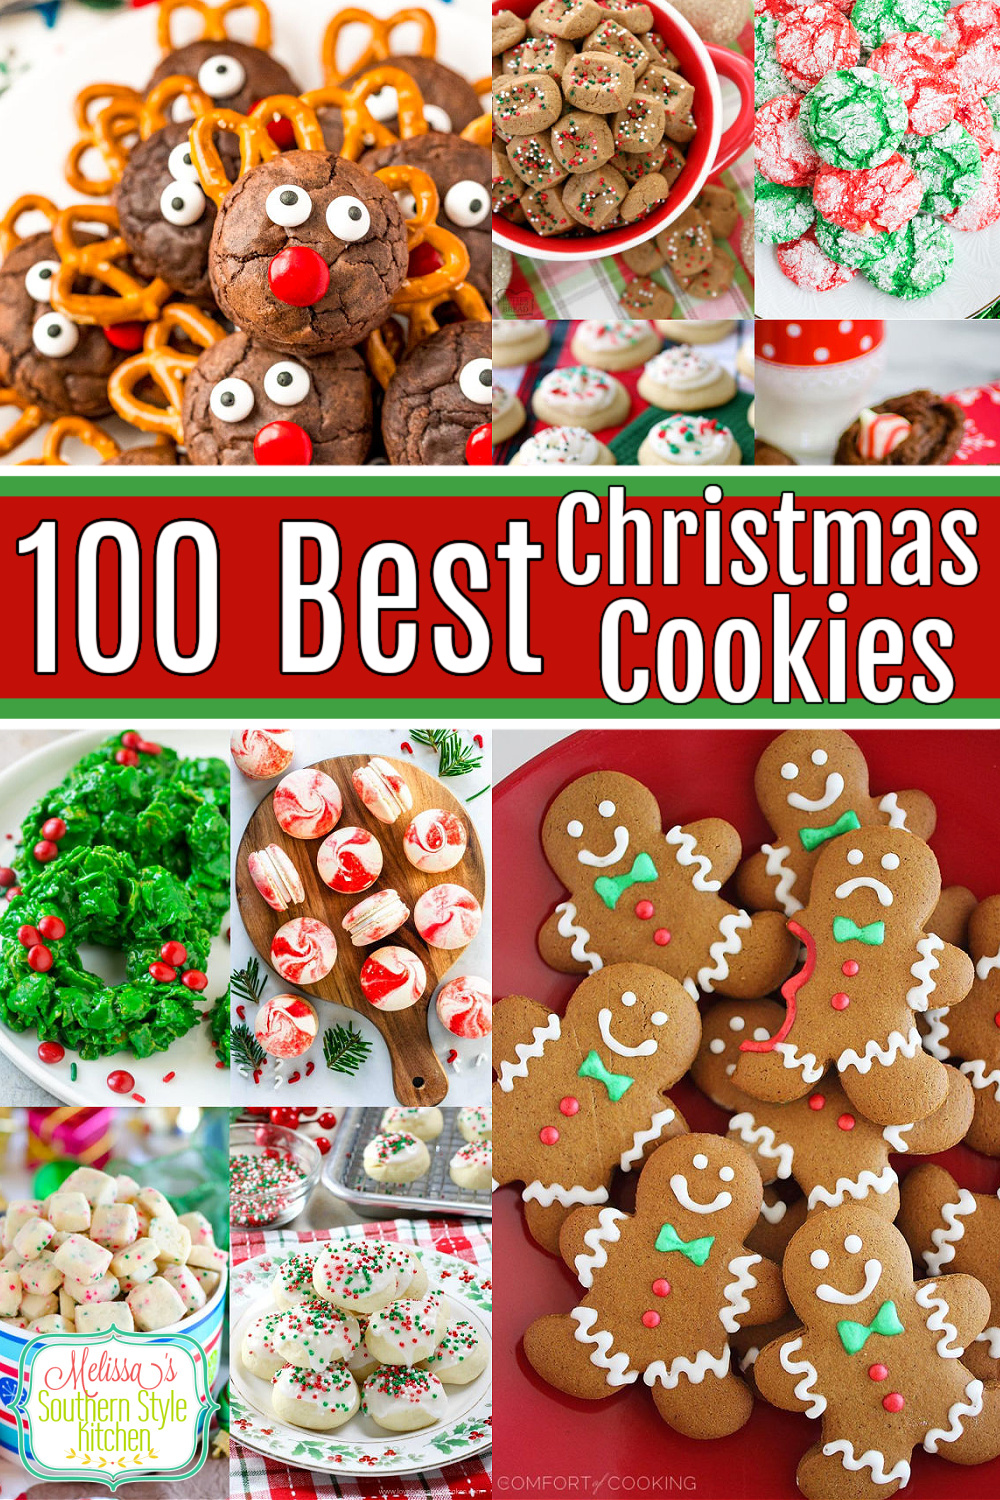 Kick off the holiday season and host a Virtual Cookie Swap with this collection of 100 of the Best Christmas Cookies #christmascookies #cookierecipes #cookieswap #virtualcookieswap #bestcookierecipes #100bestchristmascookies #cookies #holidaybaking #desserts #dessertfoodrecipes via @melissasssk